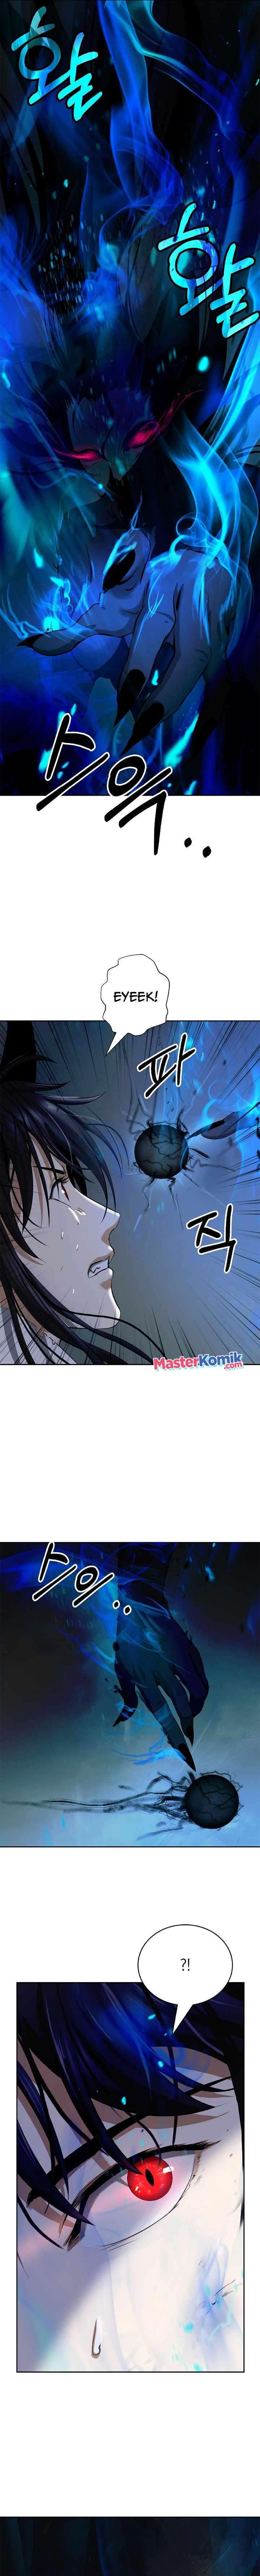 Cystic Story Chapter 82